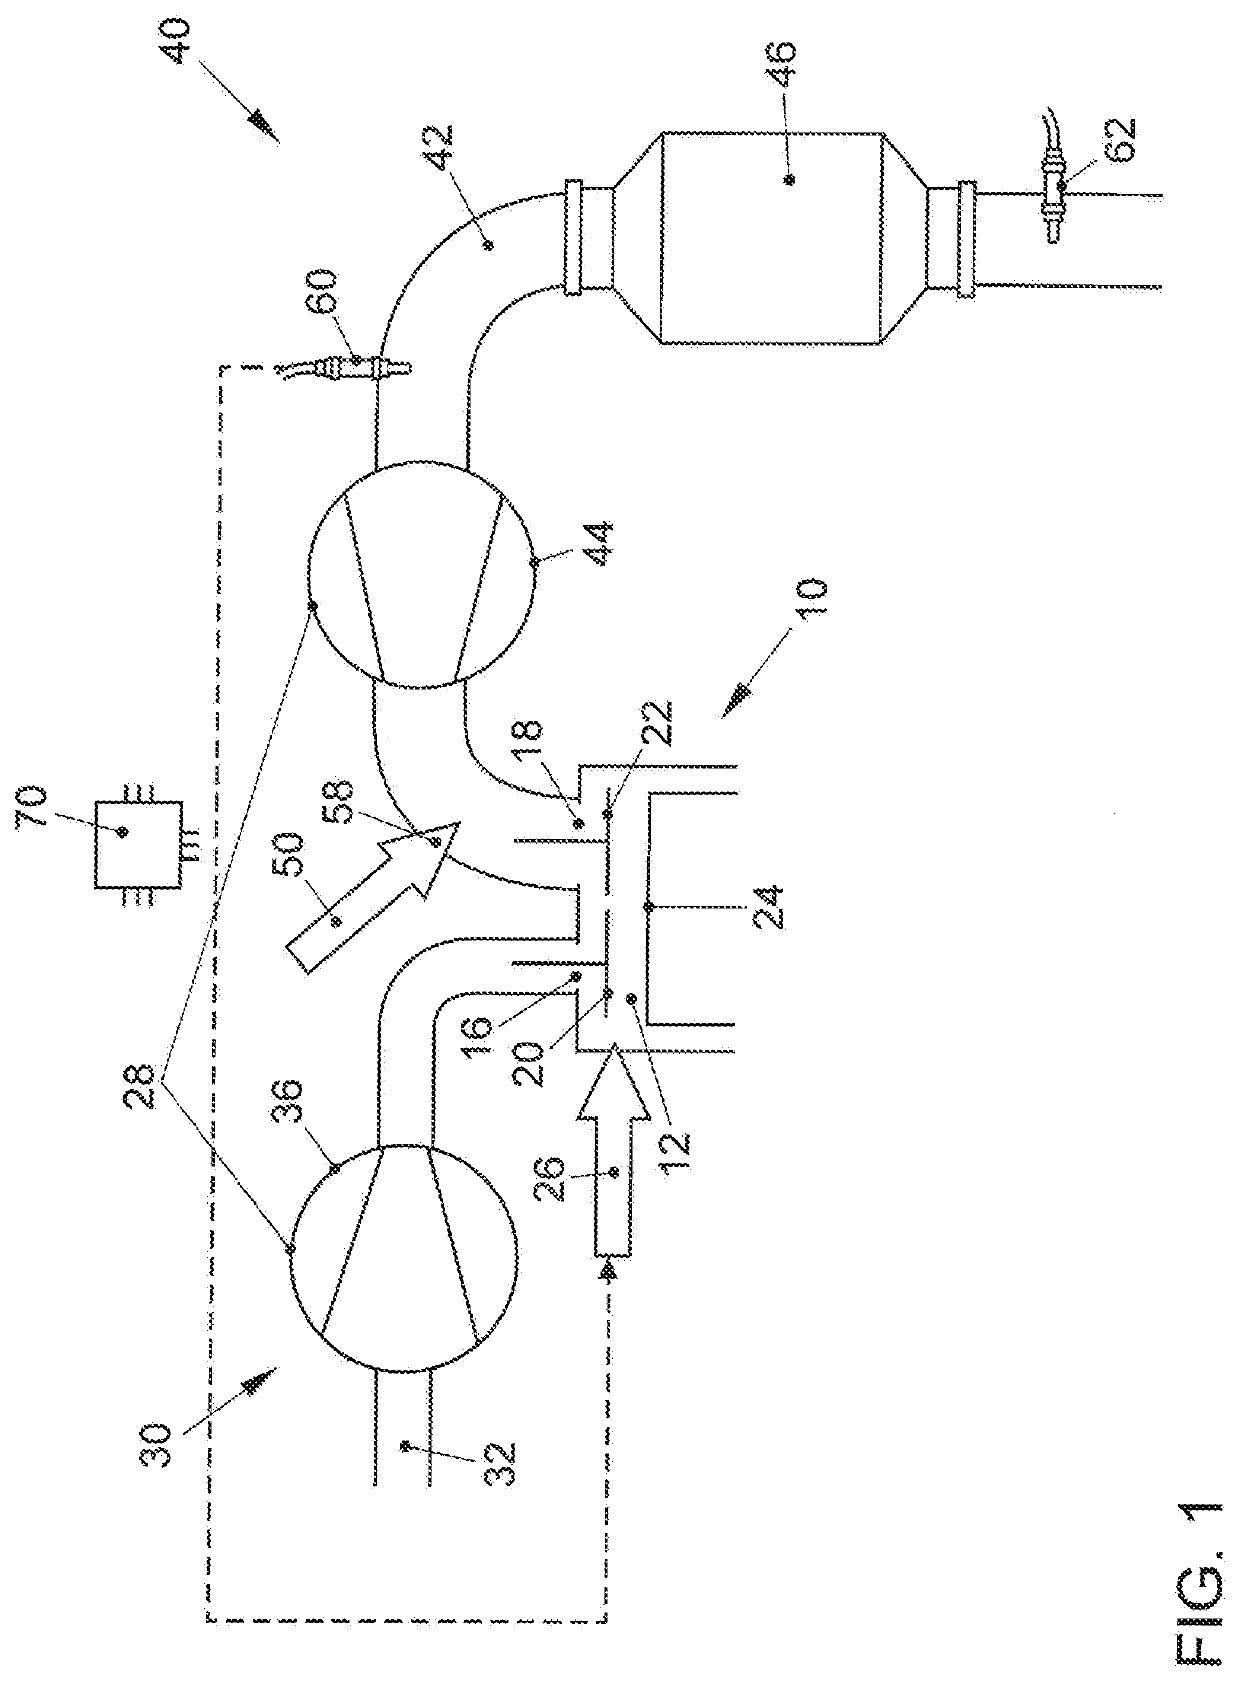 Method and device for the exhaust aftertreatment of an internal combustion engine